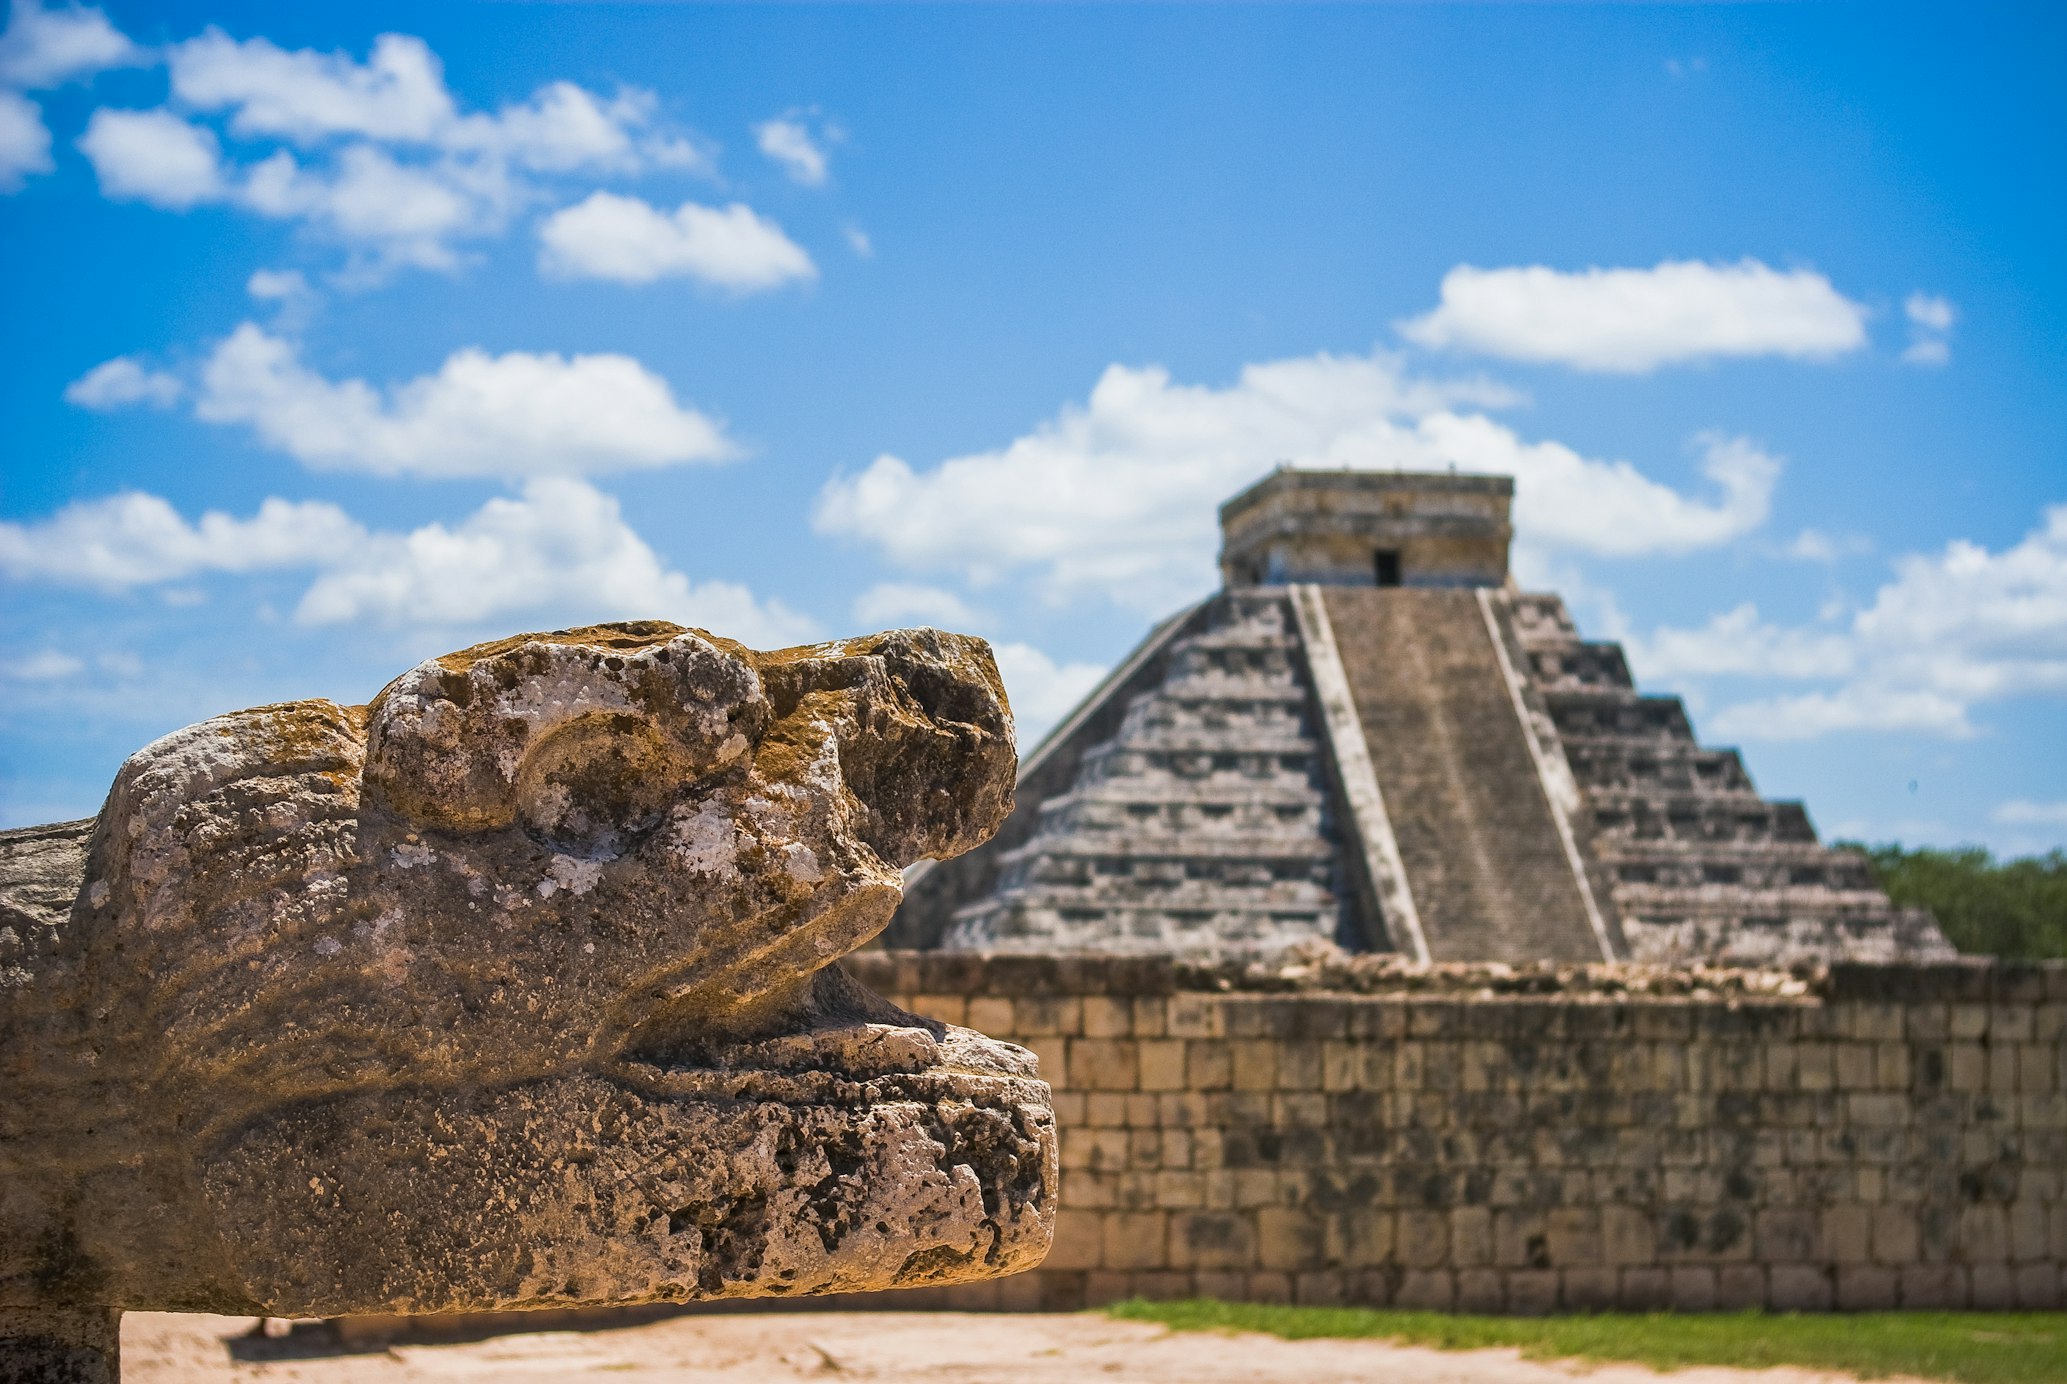 Mexico Travel Guide - Attractions, What to See, Do, Costs, FAQs